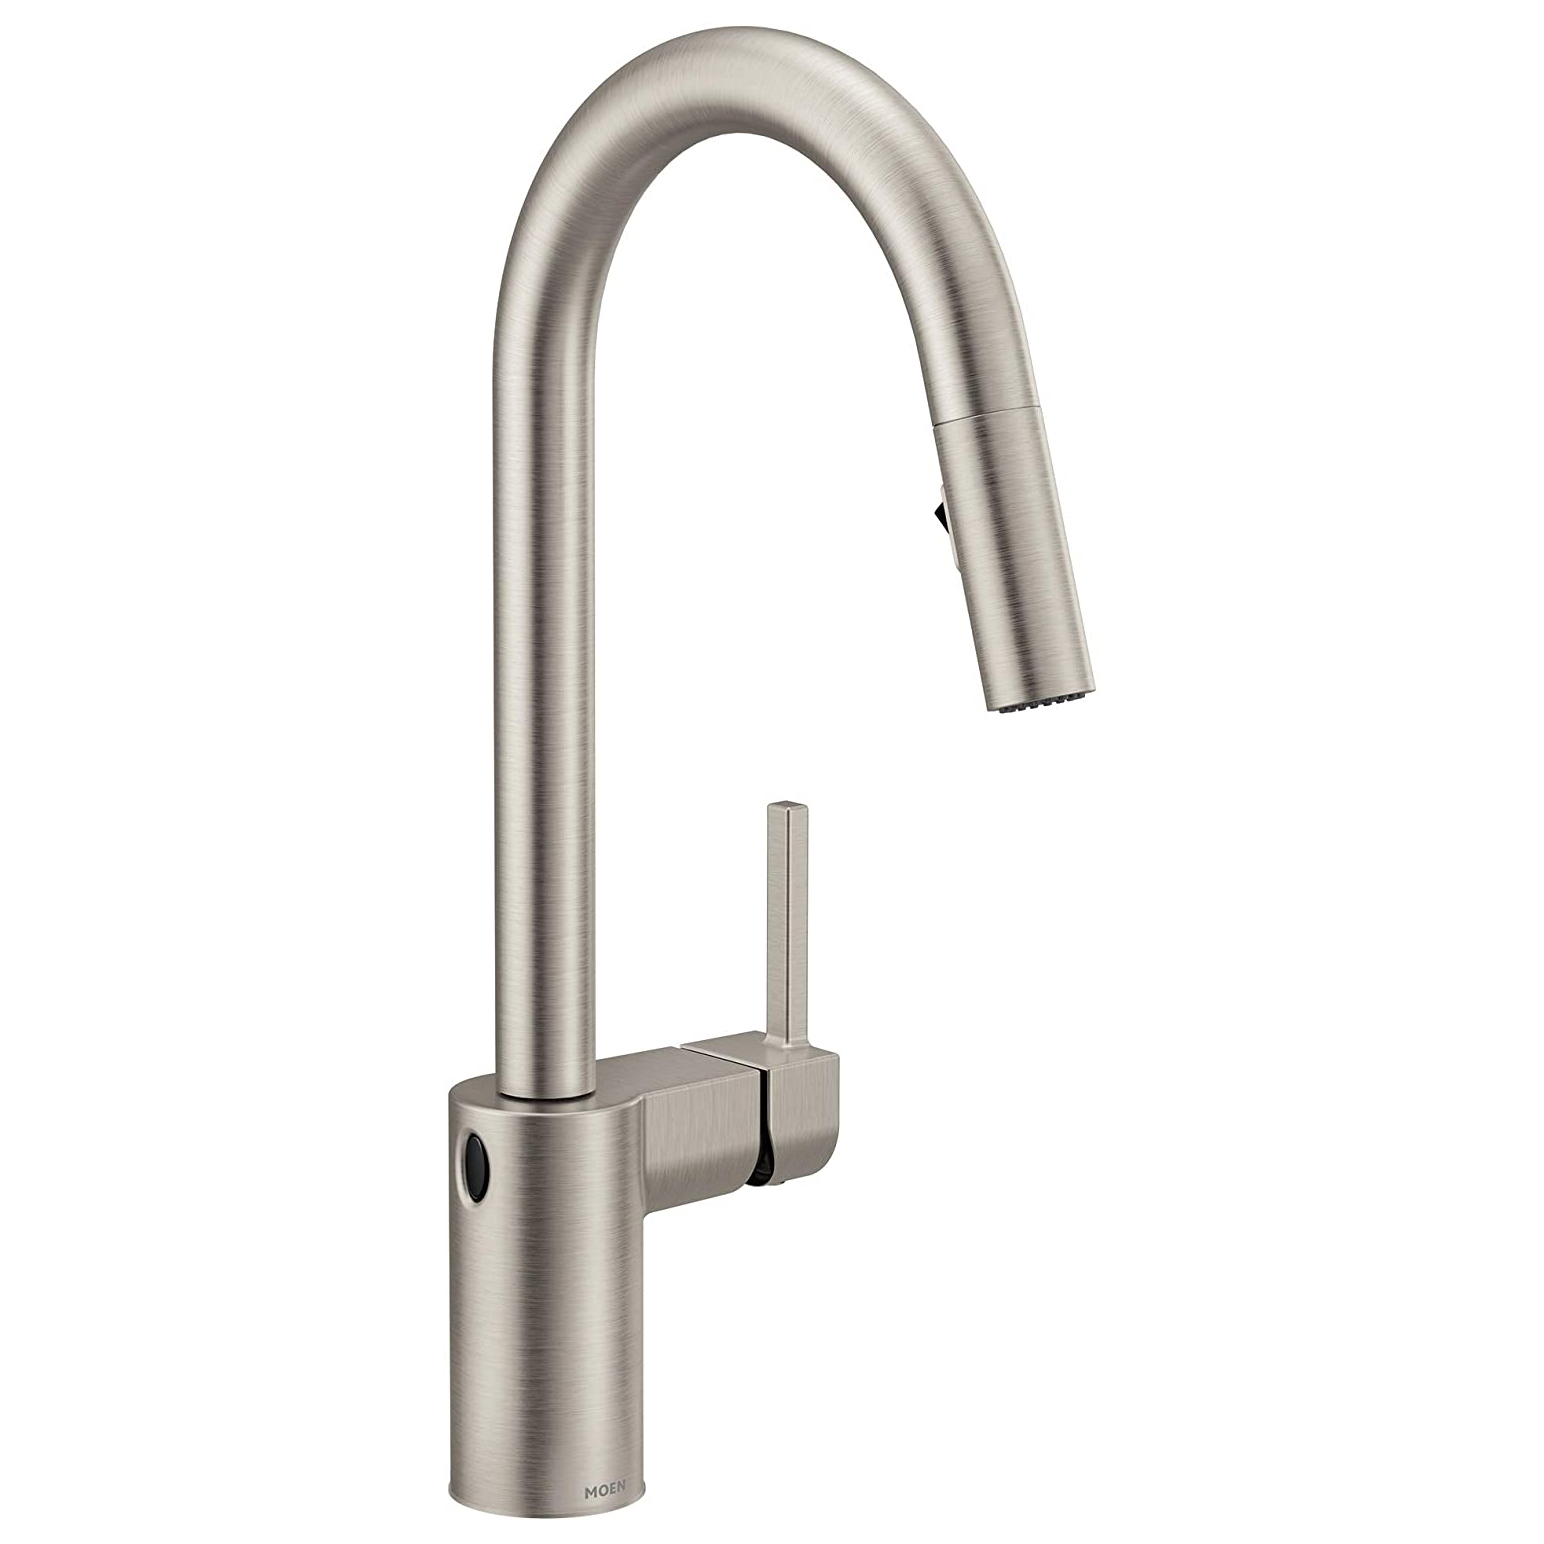 Align MotionSense Wave Pulldown Kitchen Faucet in Stainless